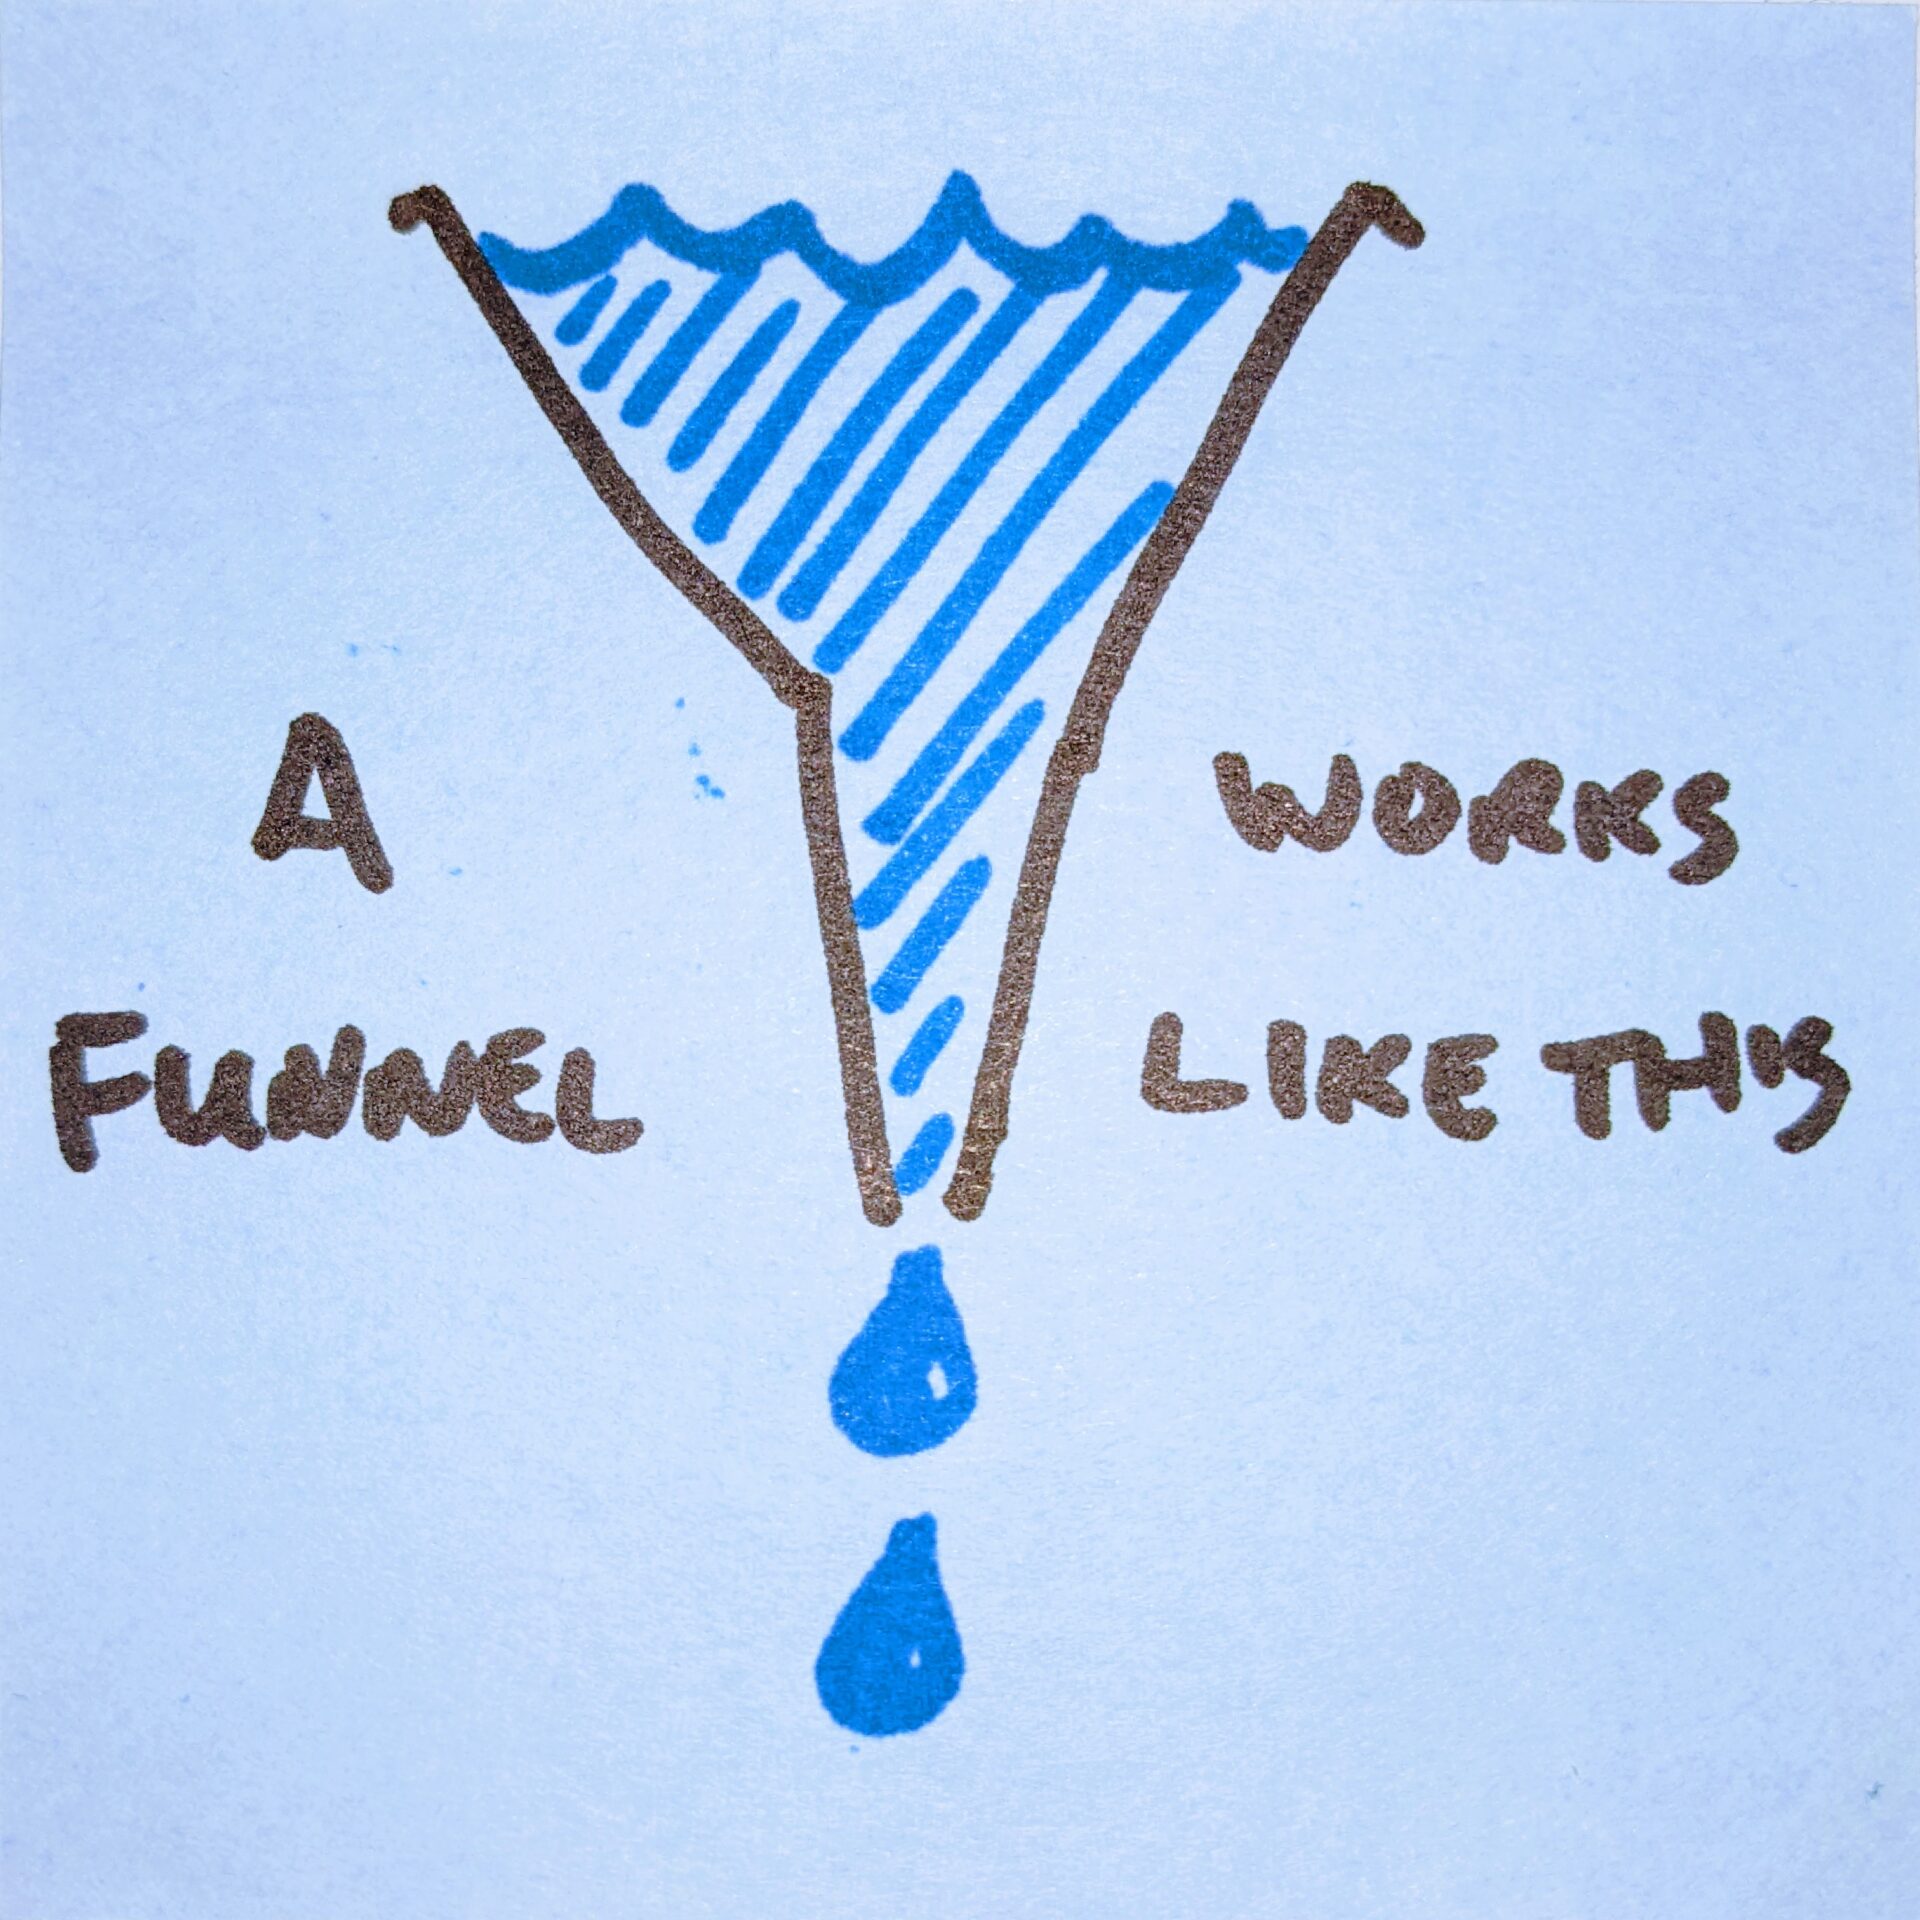 A funnel works like this